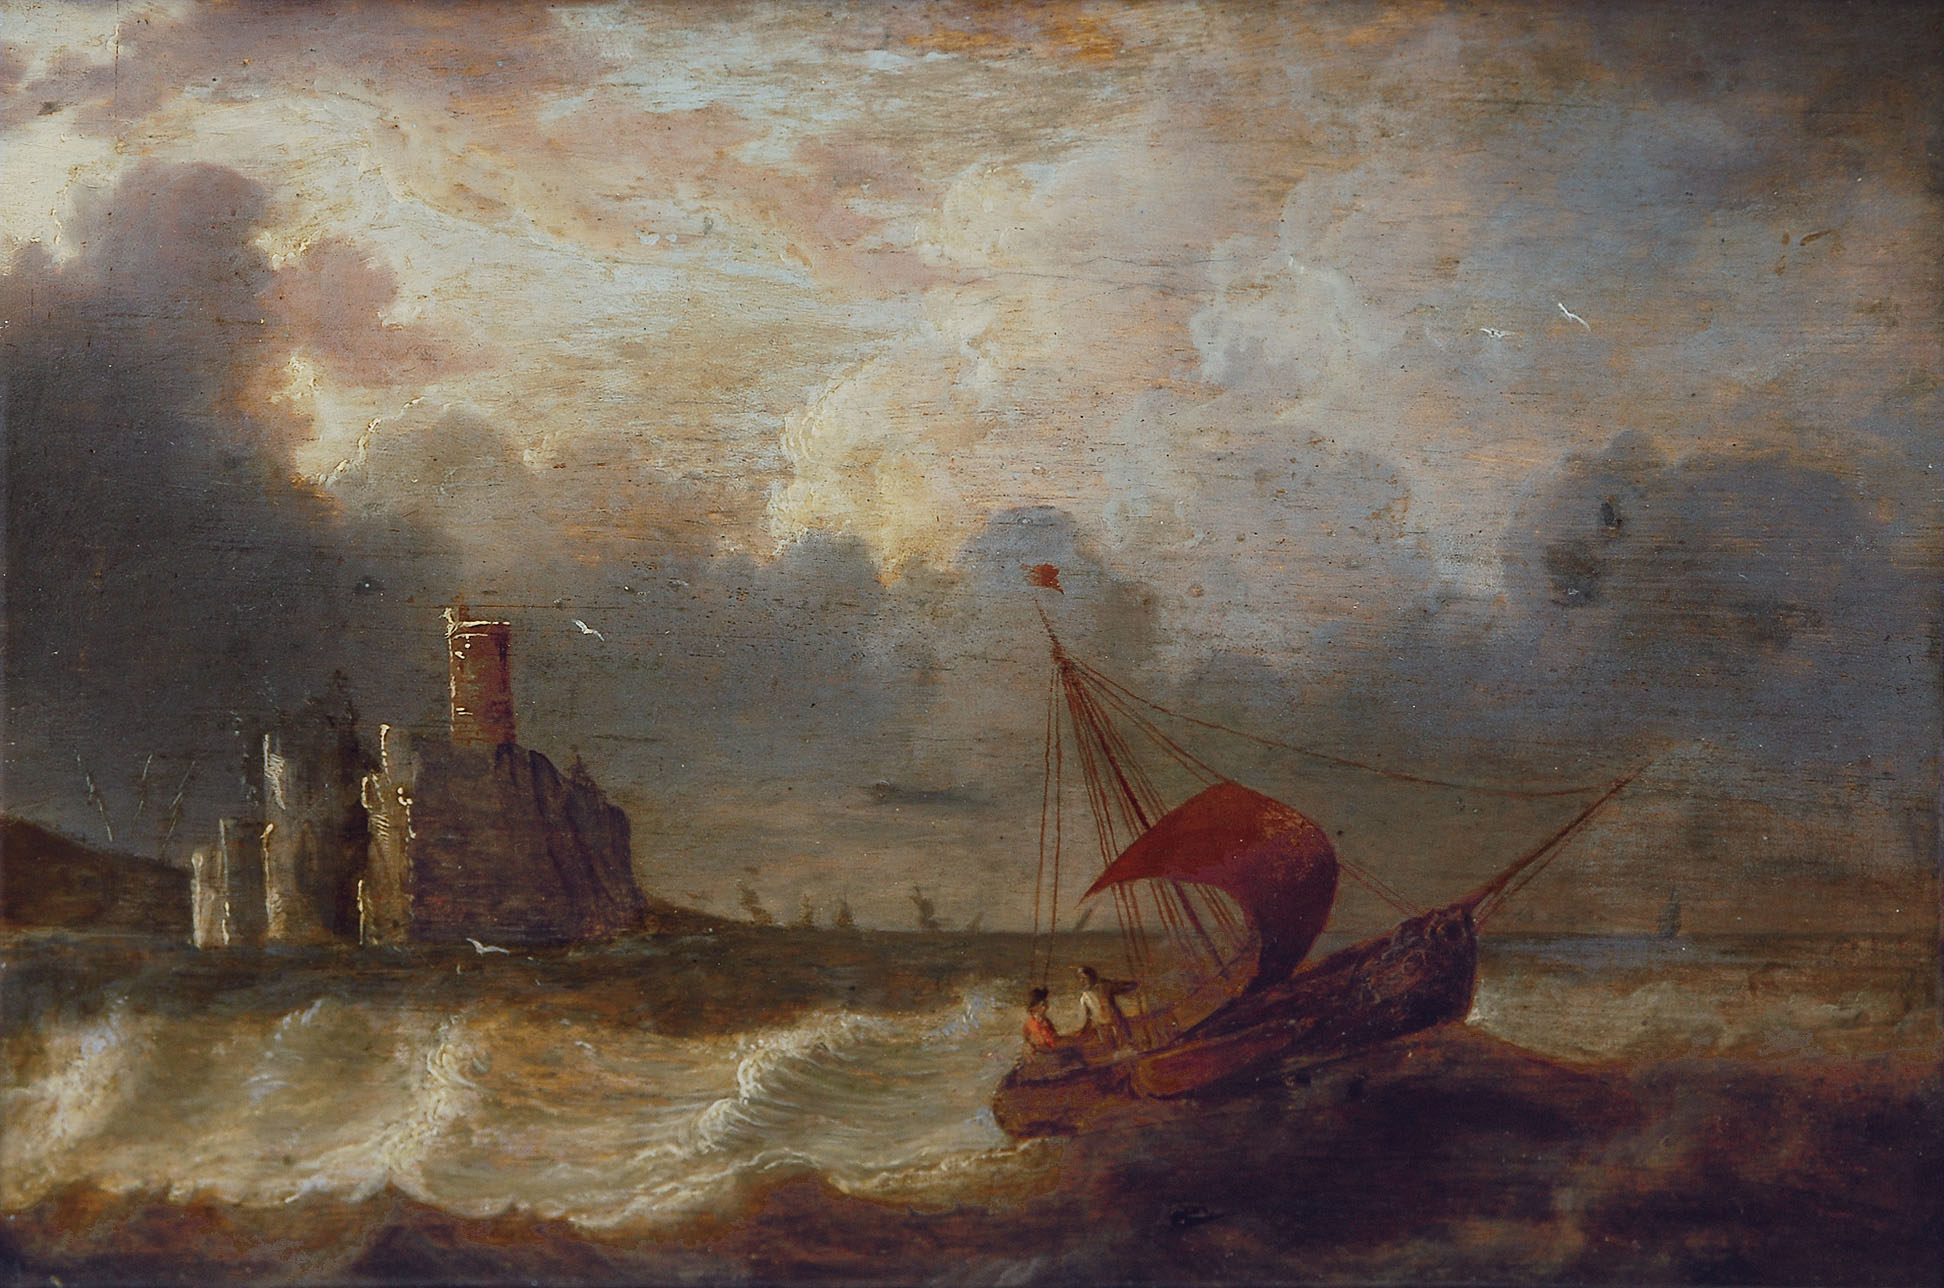 Coastel scene with a sailing boat in a stormy sea